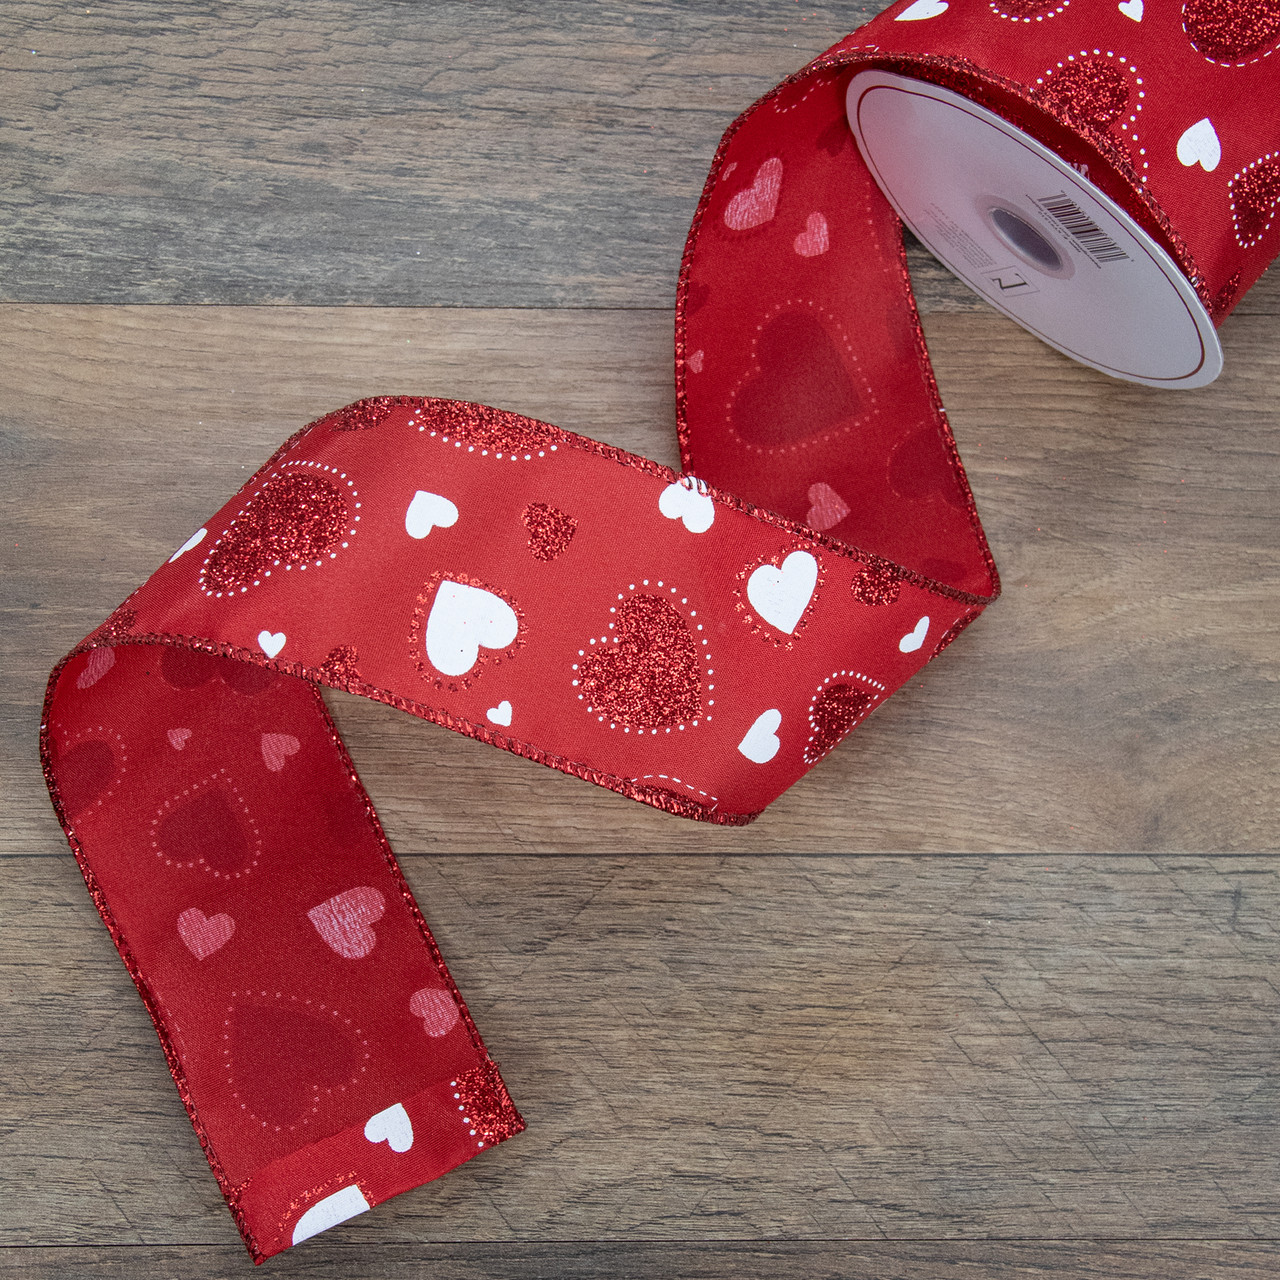 2.5 Red Sheer White Sparkle Hearts Valentine's Day Wire Ribbon (10 yards)